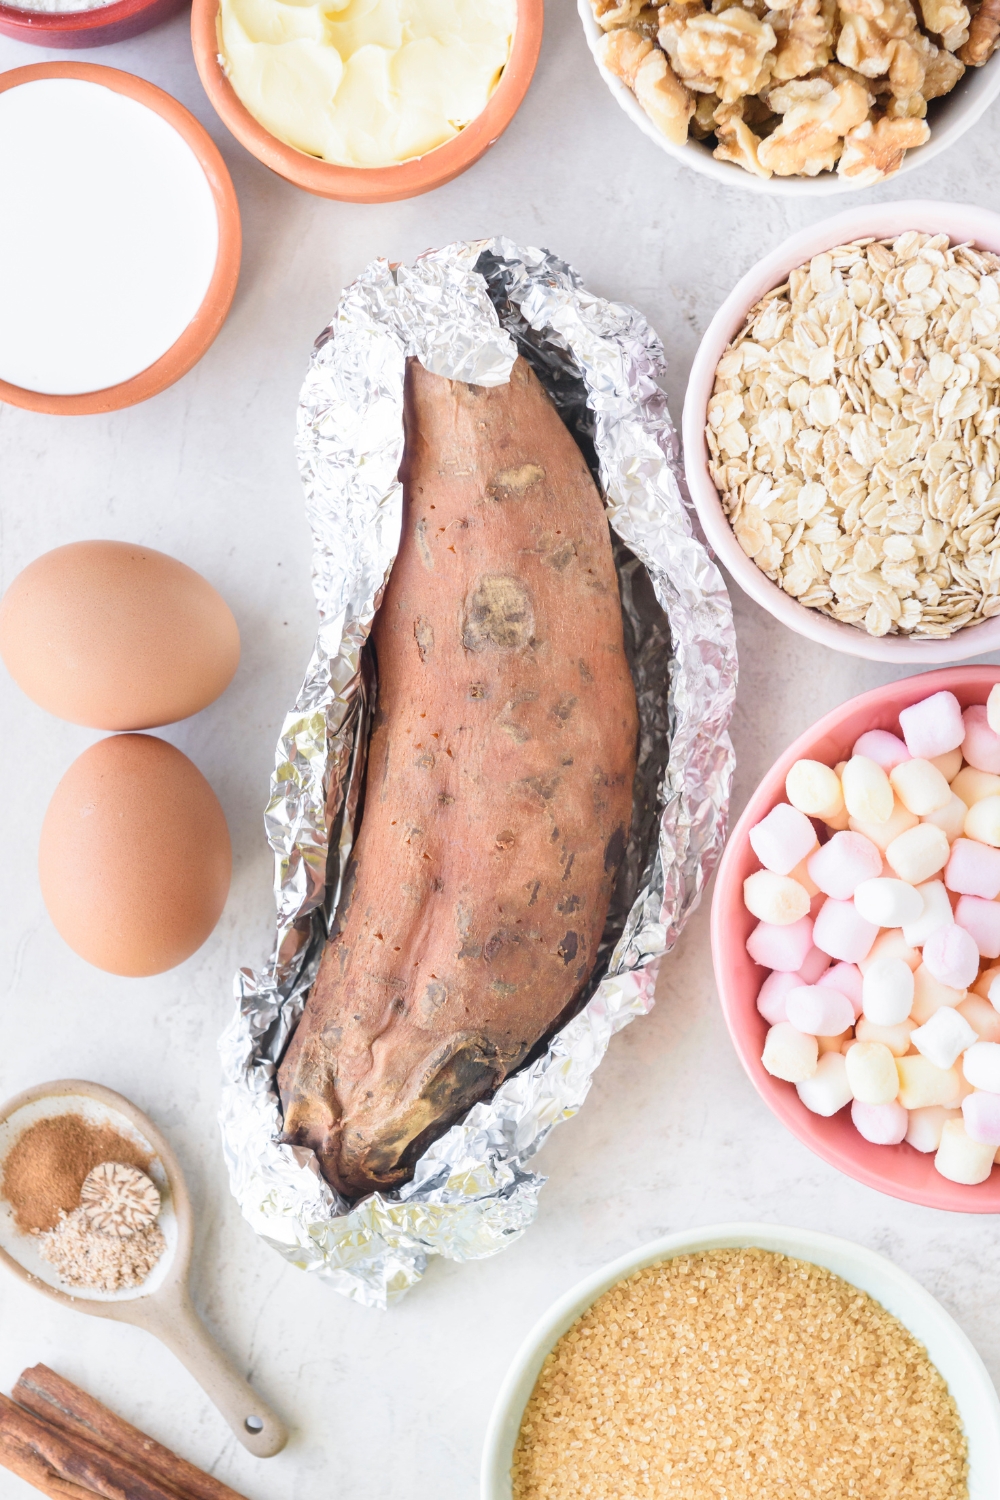 One large sweet potato partially wrapped in foil is on a white counter. Surrounding the potato are bowls of walnuts, oats, marshmallows, brown sugar, flour, cream, and two eggs.